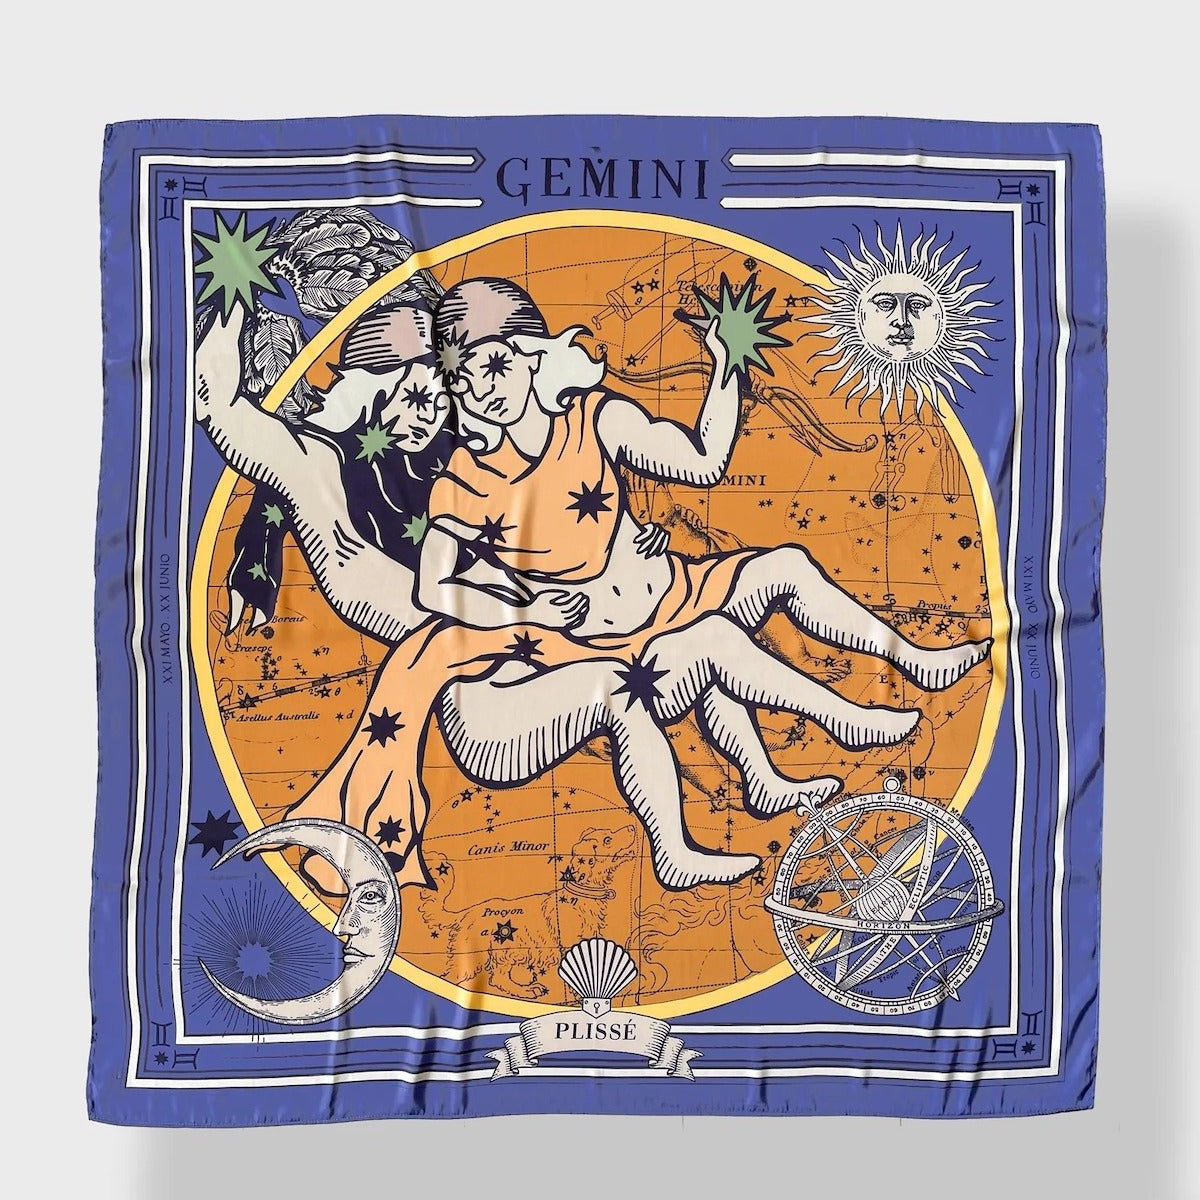 Zodiac Scarf for Gemini made by Plisse. Gorgeous image of twins holding stars on a blue background.